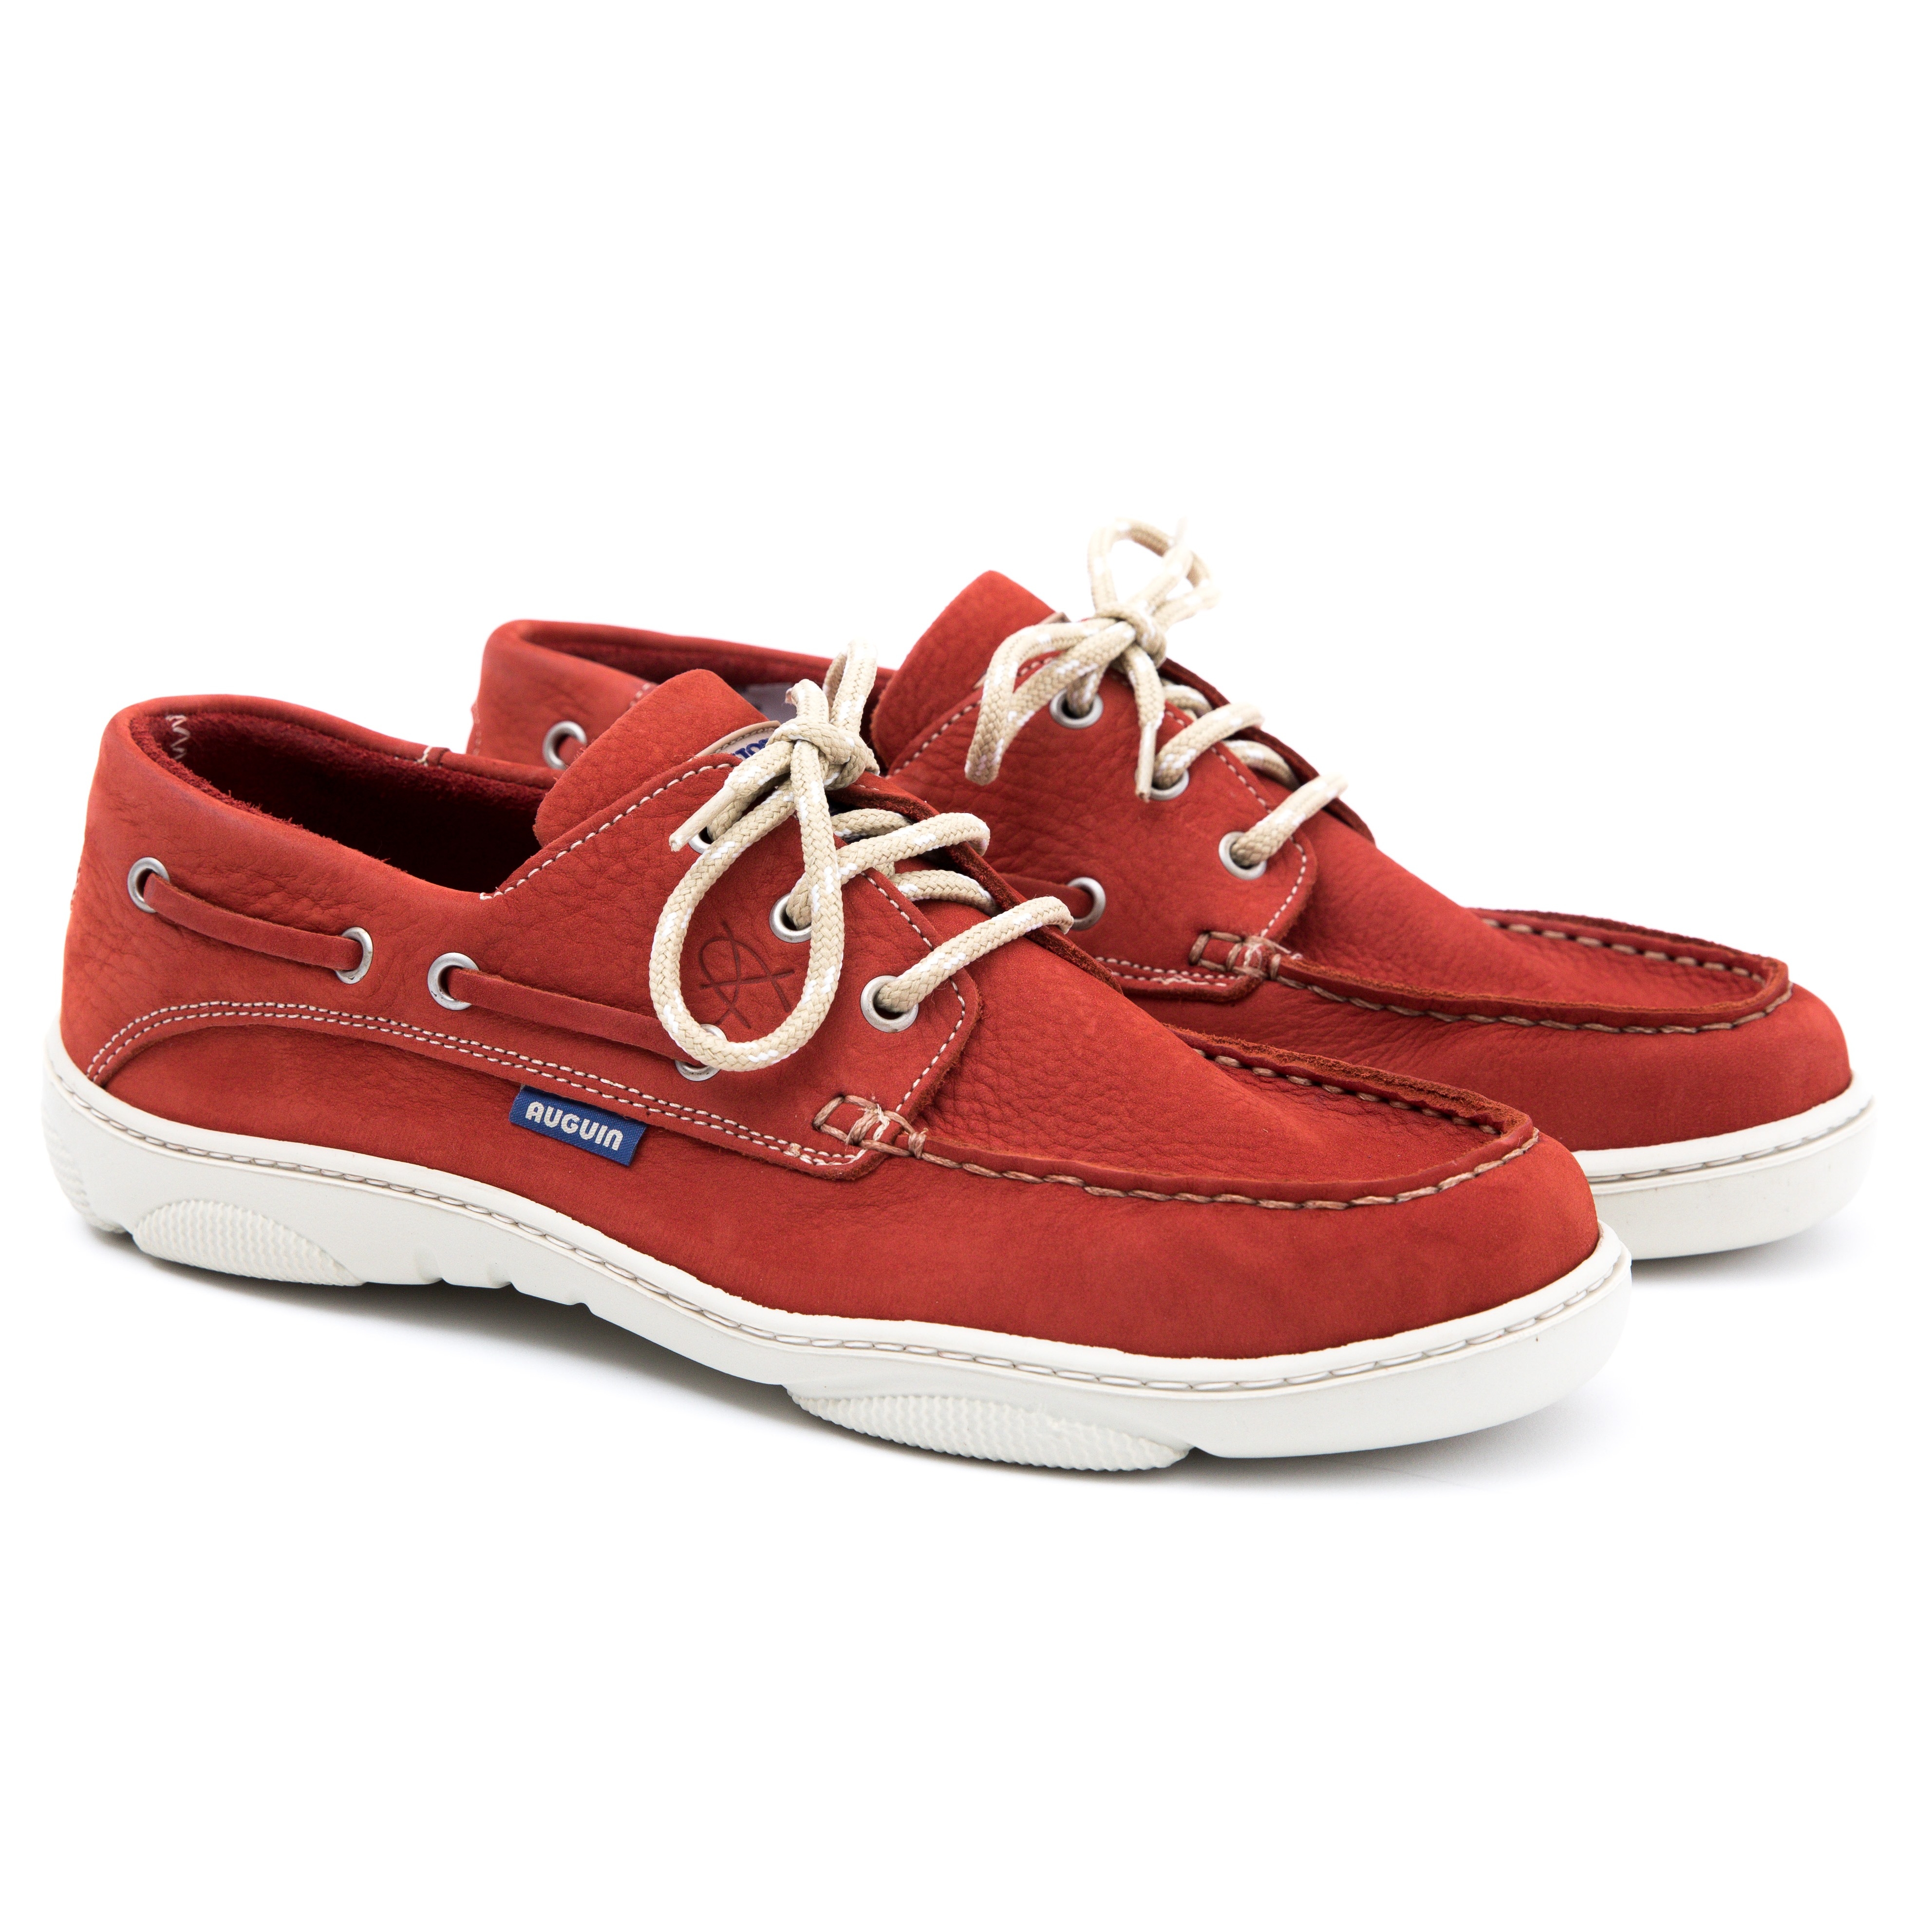 AUGUIN BOAT SHOE - CHRISTOPHE AUGUIN STOCK SERVICE : SHOES : Digby's ...